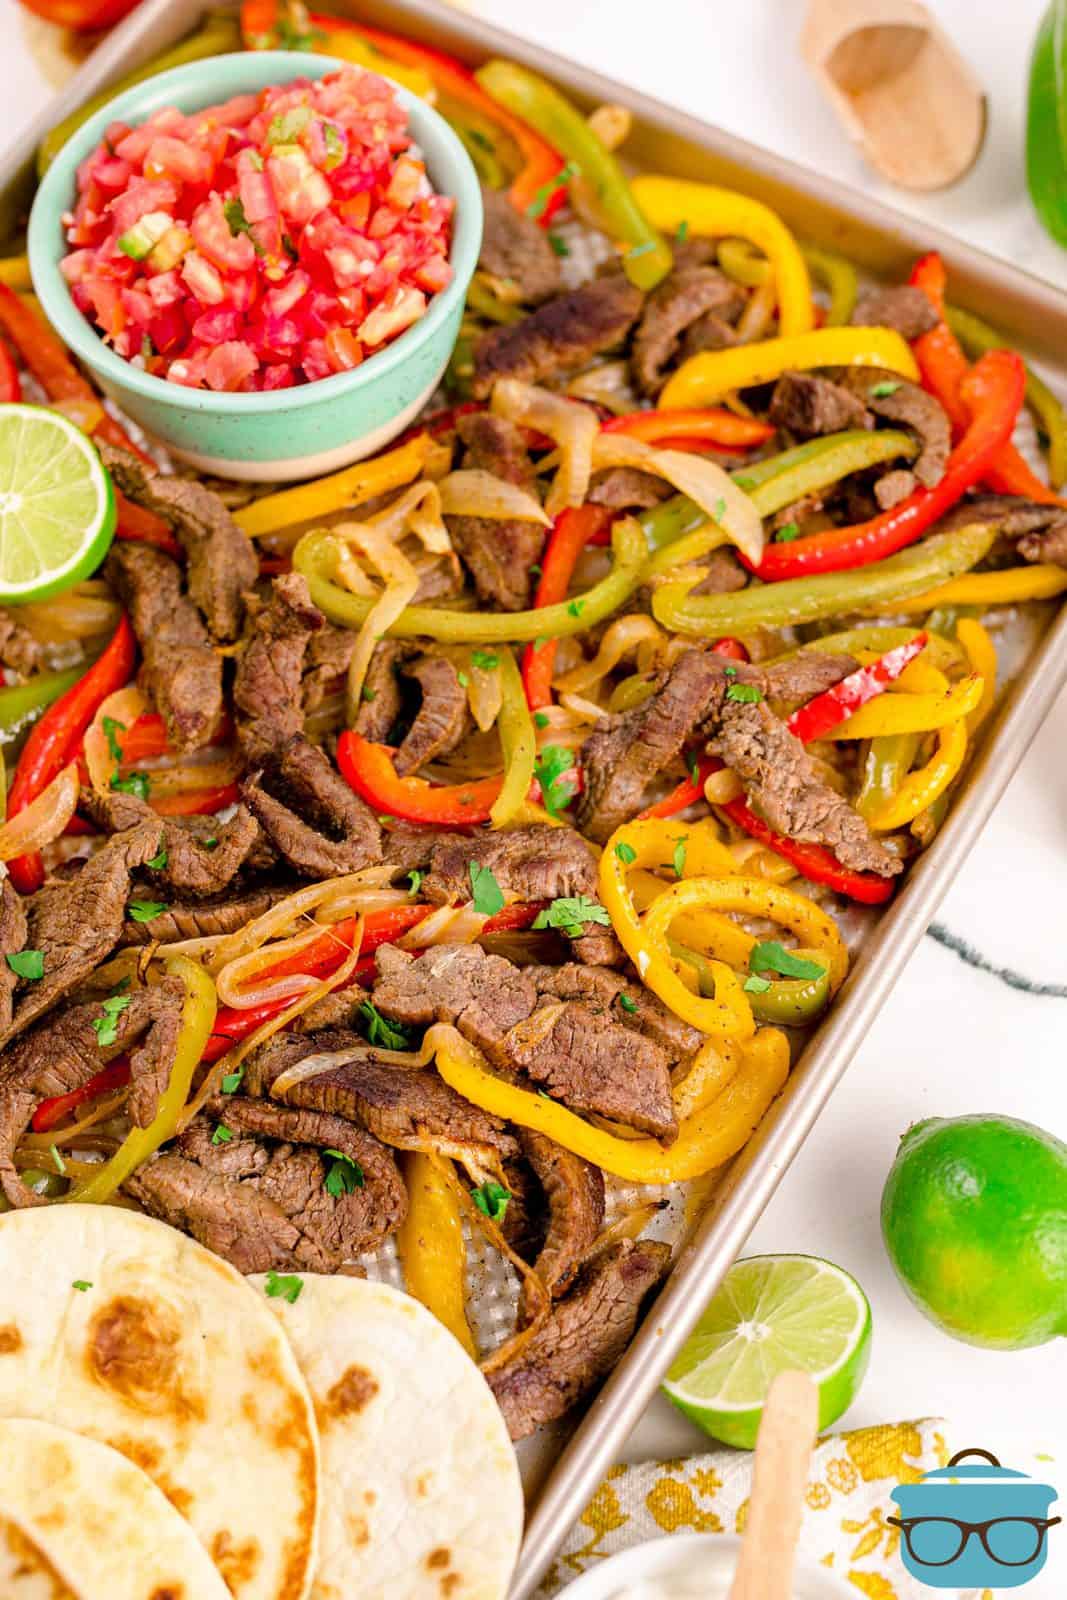 Finished Sheet Pan Beef Fajitas on pan with toppings and tortillas.